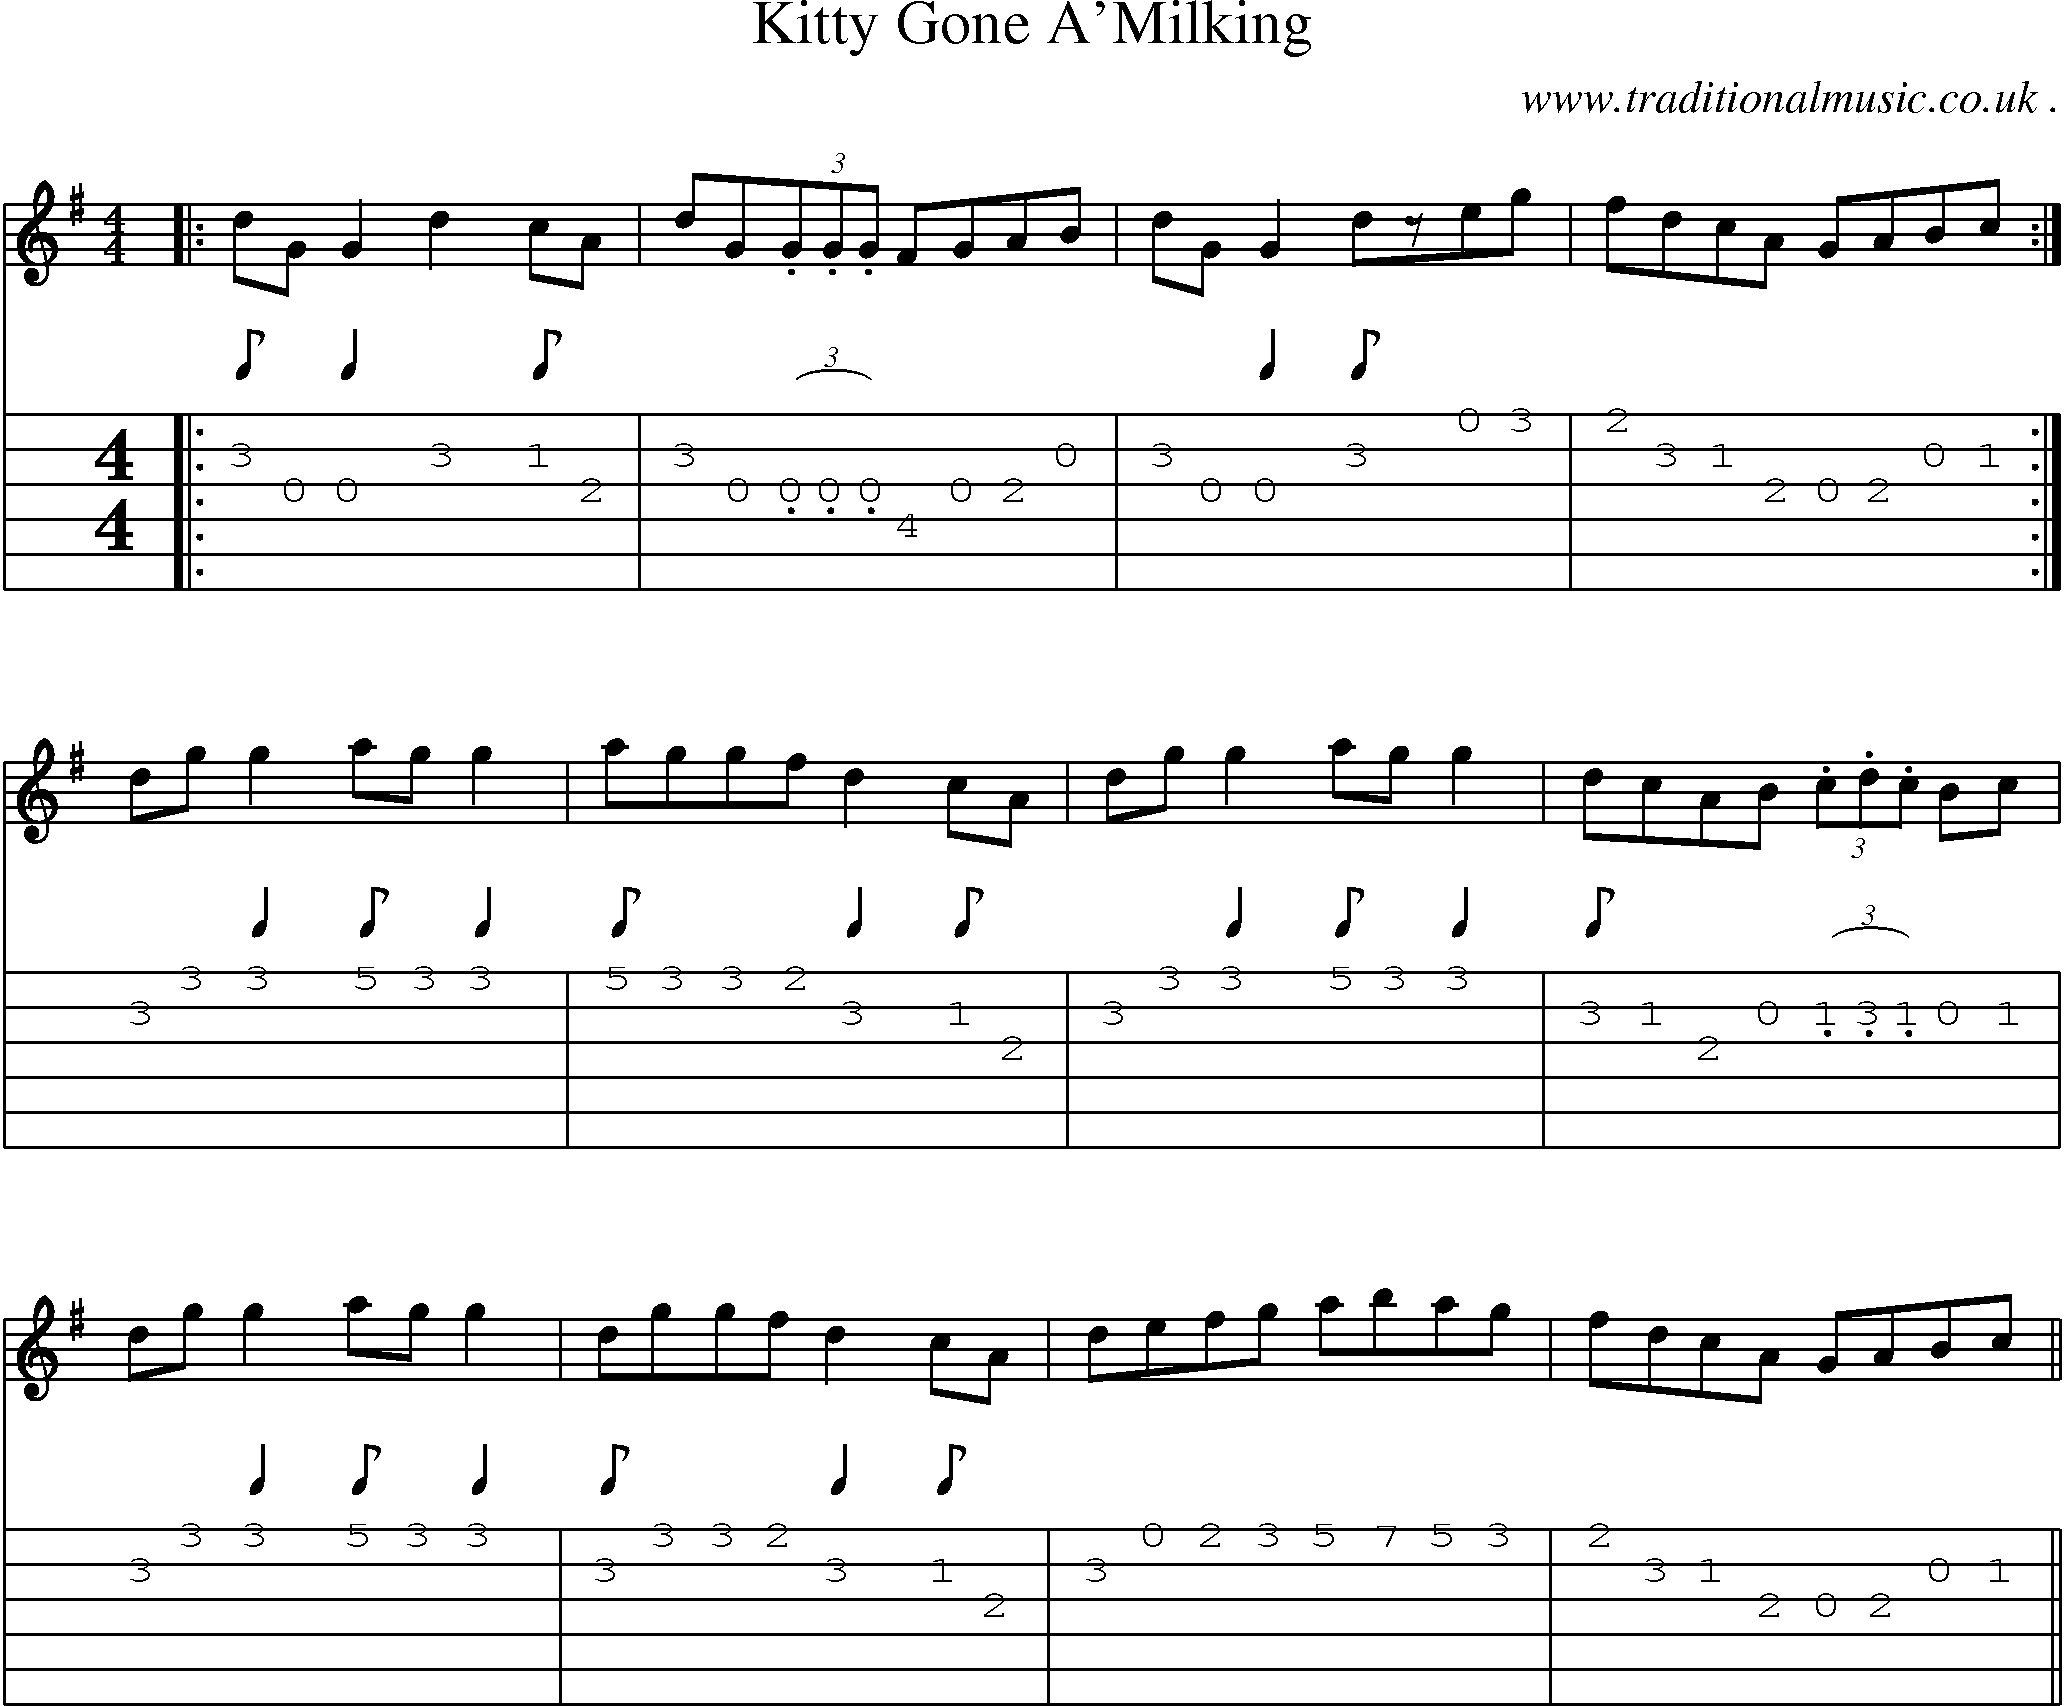 Sheet-Music and Guitar Tabs for Kitty Gone Amilking